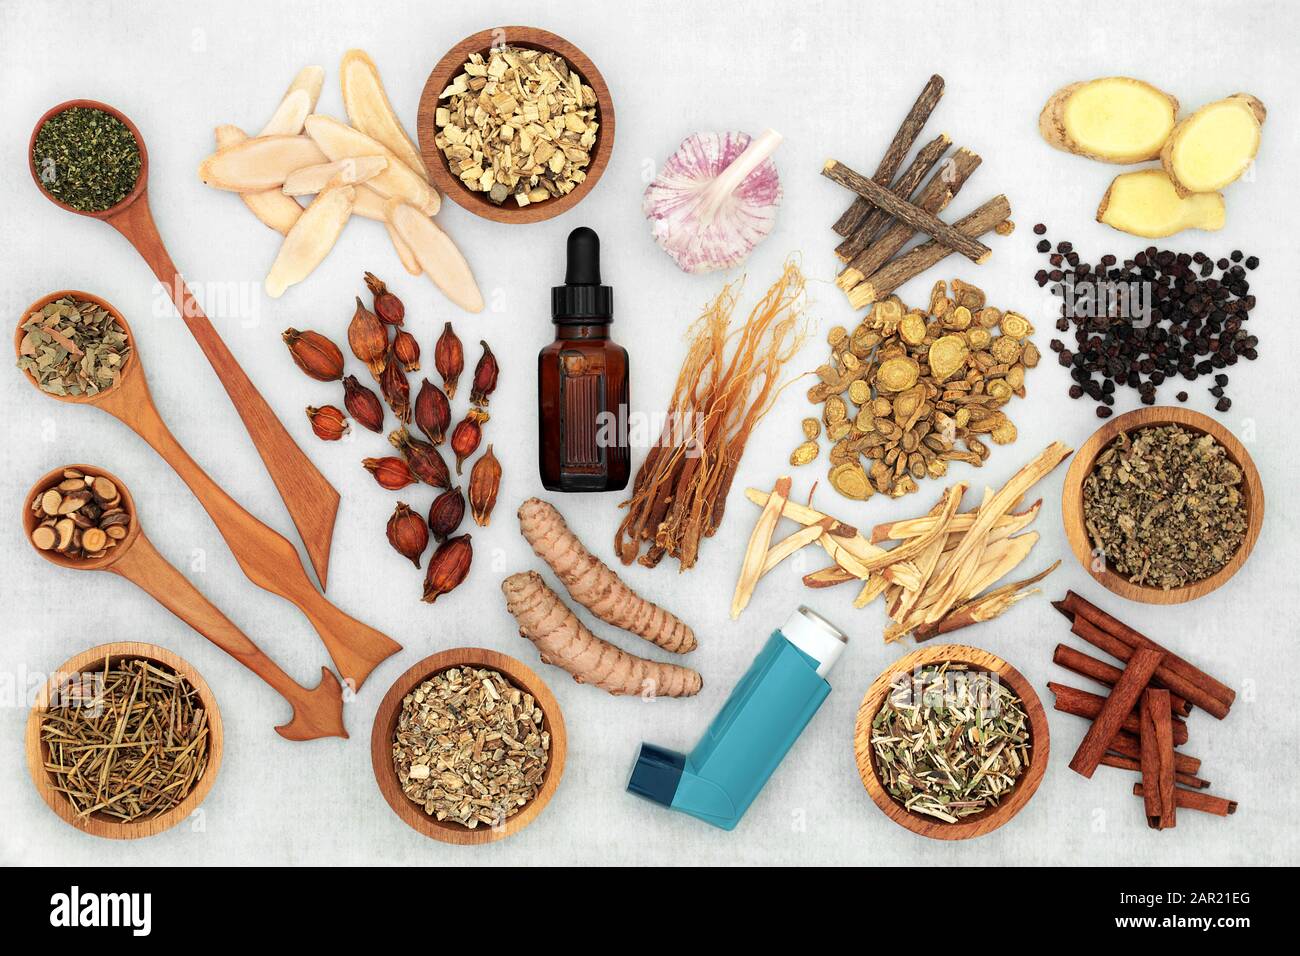 Food and medicine to treat asthma and respiratory diseases with chinese herbal medicine, essential oil and ventilator. Flat lay. Stock Photo